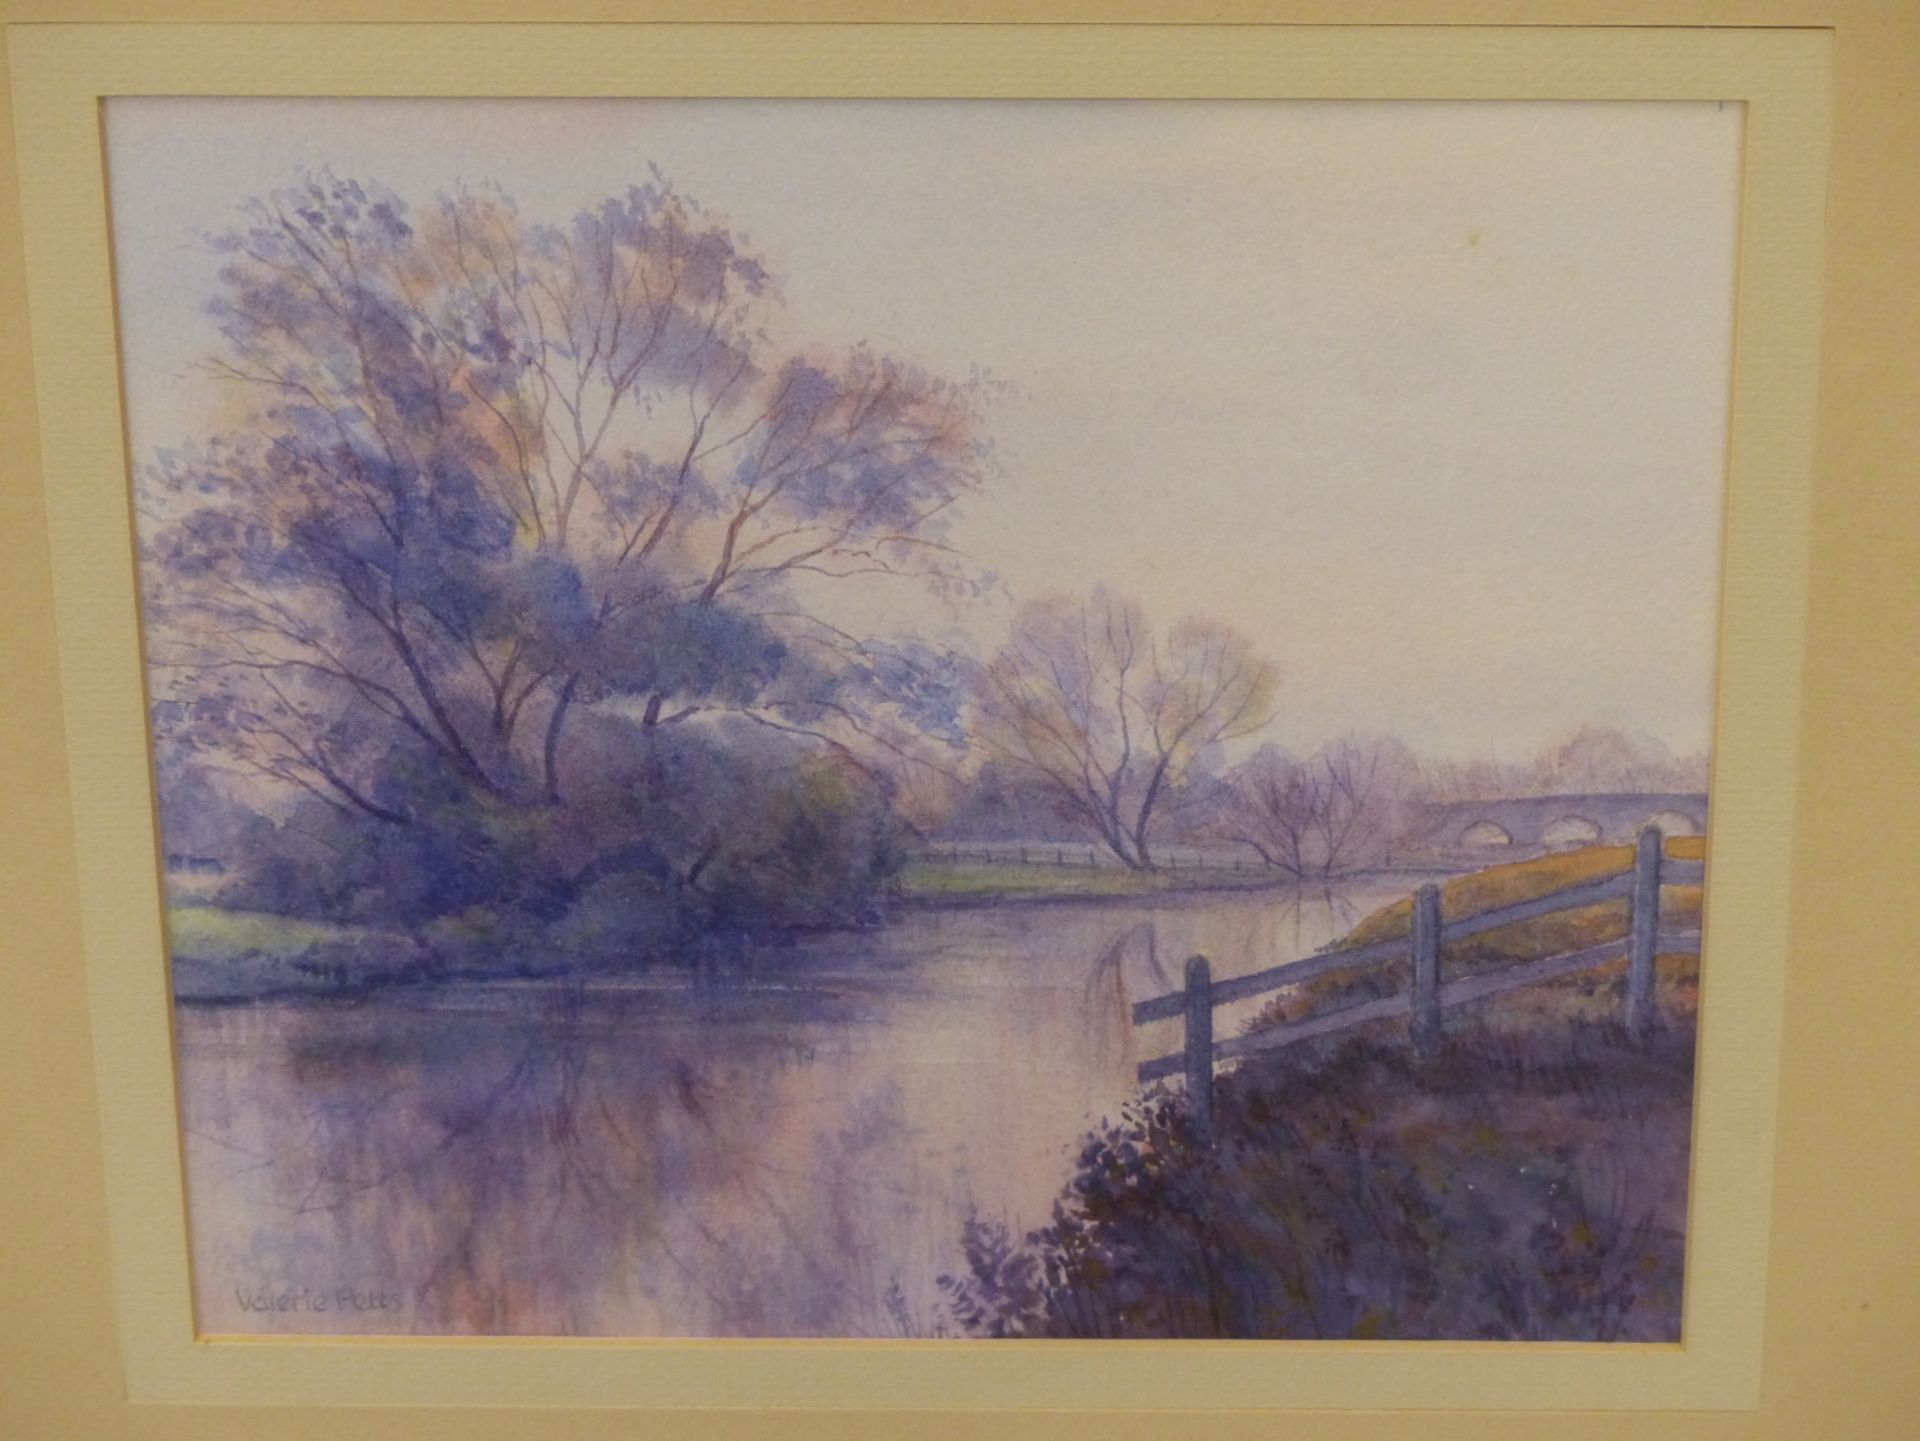 VALERIE PETTS (20TH CENTURY) ARR, THE THAMES AT NEWBRIDGE, OXFORDSHIRE, SIGNED, WATERCOLOUR, 25 X - Image 2 of 5